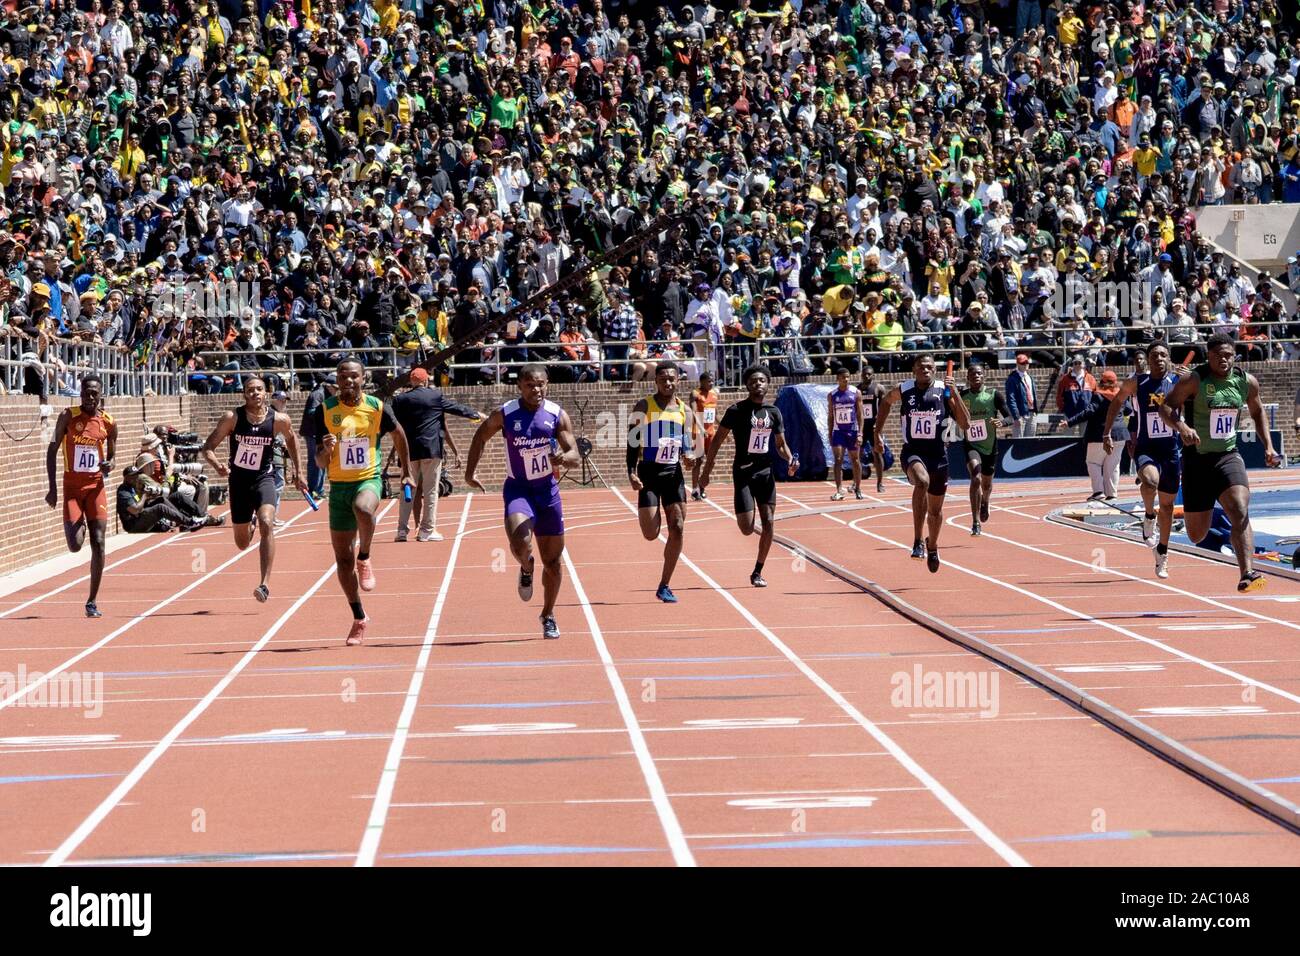 Finish of High School Boys' 4x100 Championship of America at the 2019 Penn Relay . Stock Photo